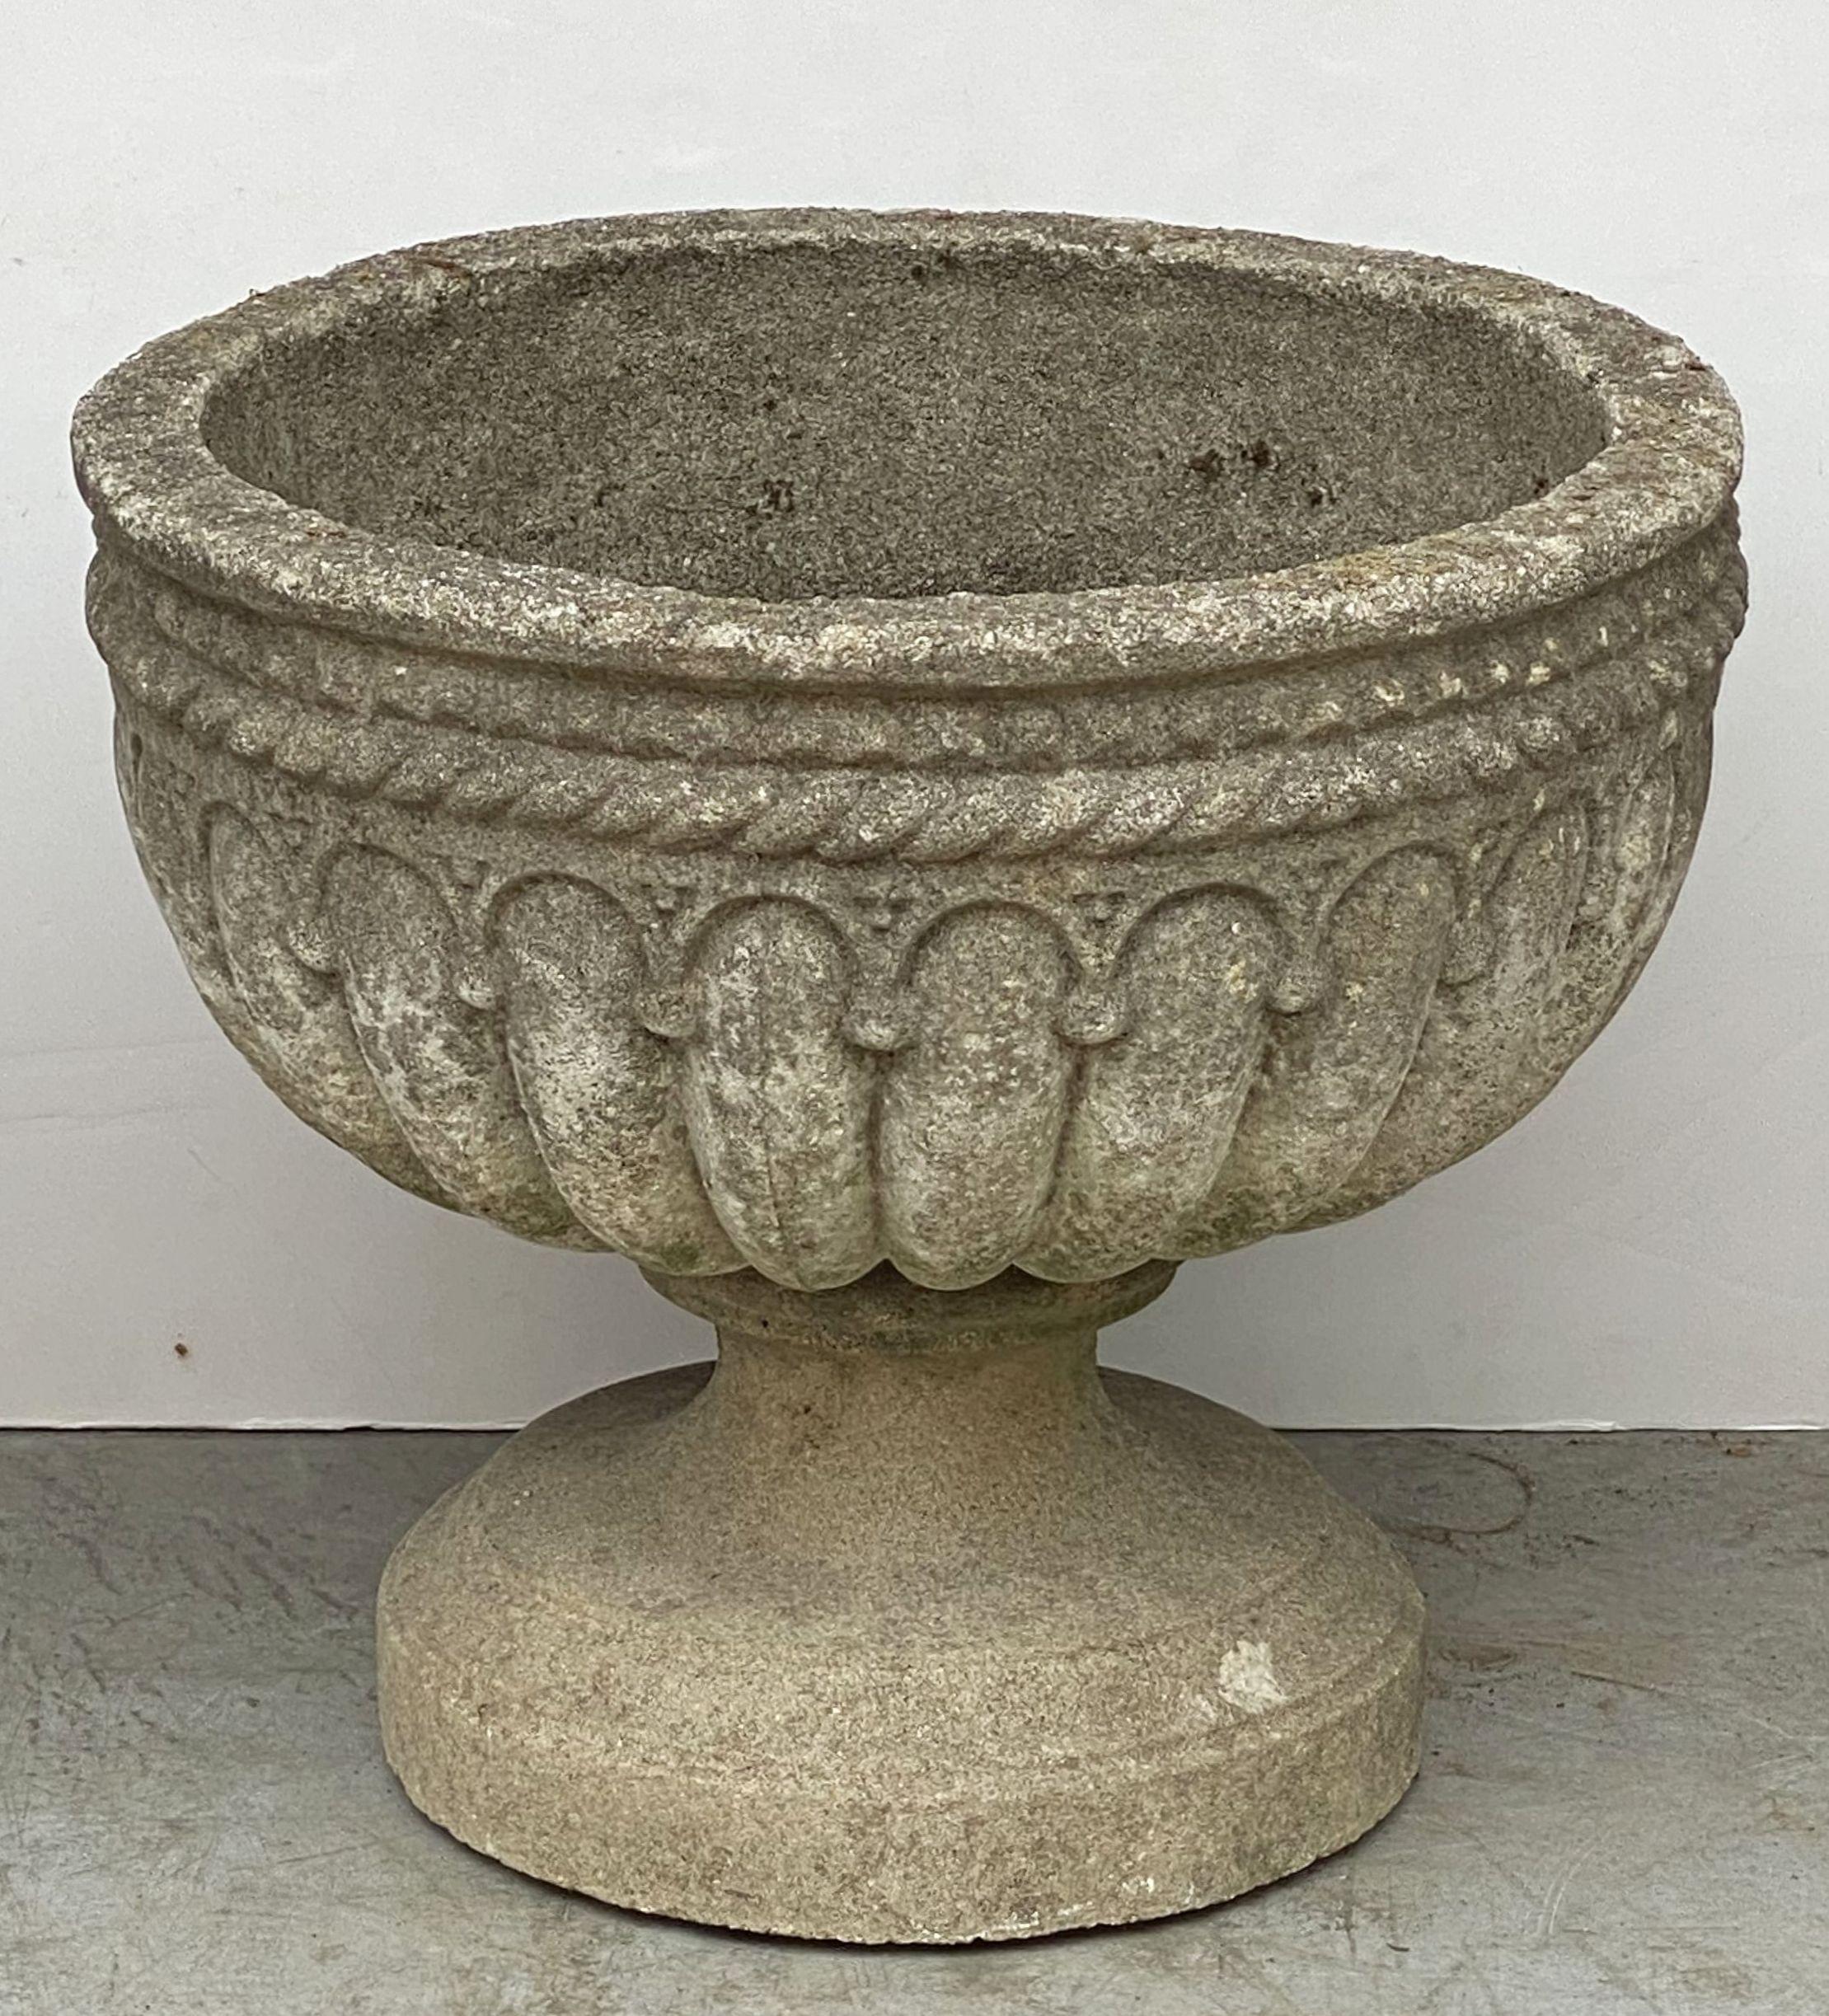 A fine pair of large English garden urns or planters of composition stone in the Classical style.
Each urn featuring a rolled rim edge over a lobed bowl on raised round base, with a braid design in relief around the circumference.

Dimensions of